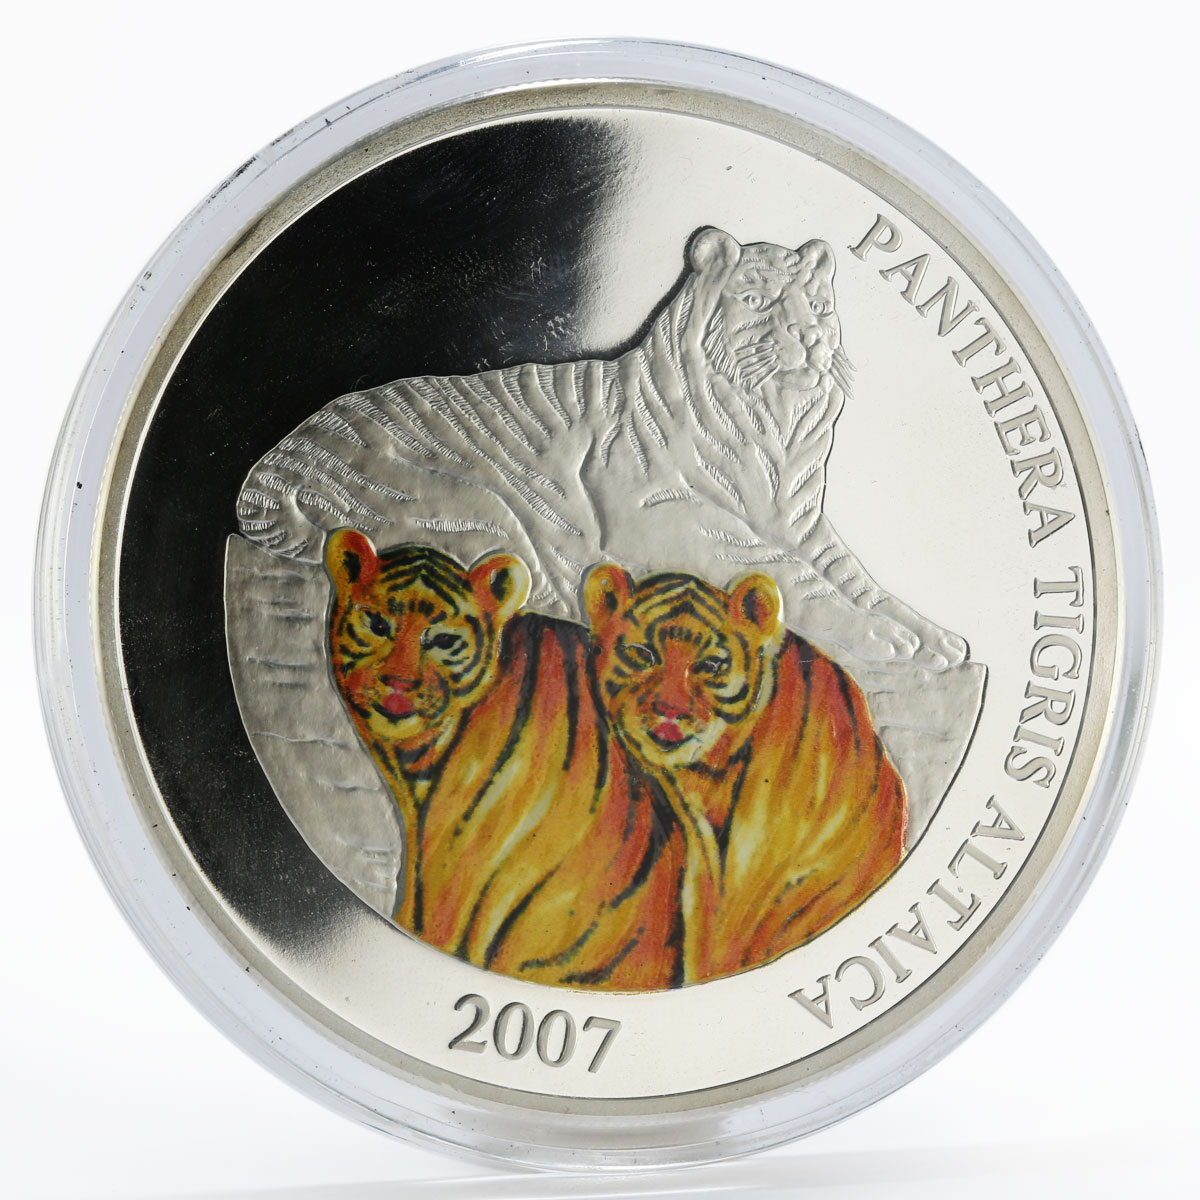 Mongolia 5000 togrog Panthera Tigris Altaica colored proof silver coin 2007